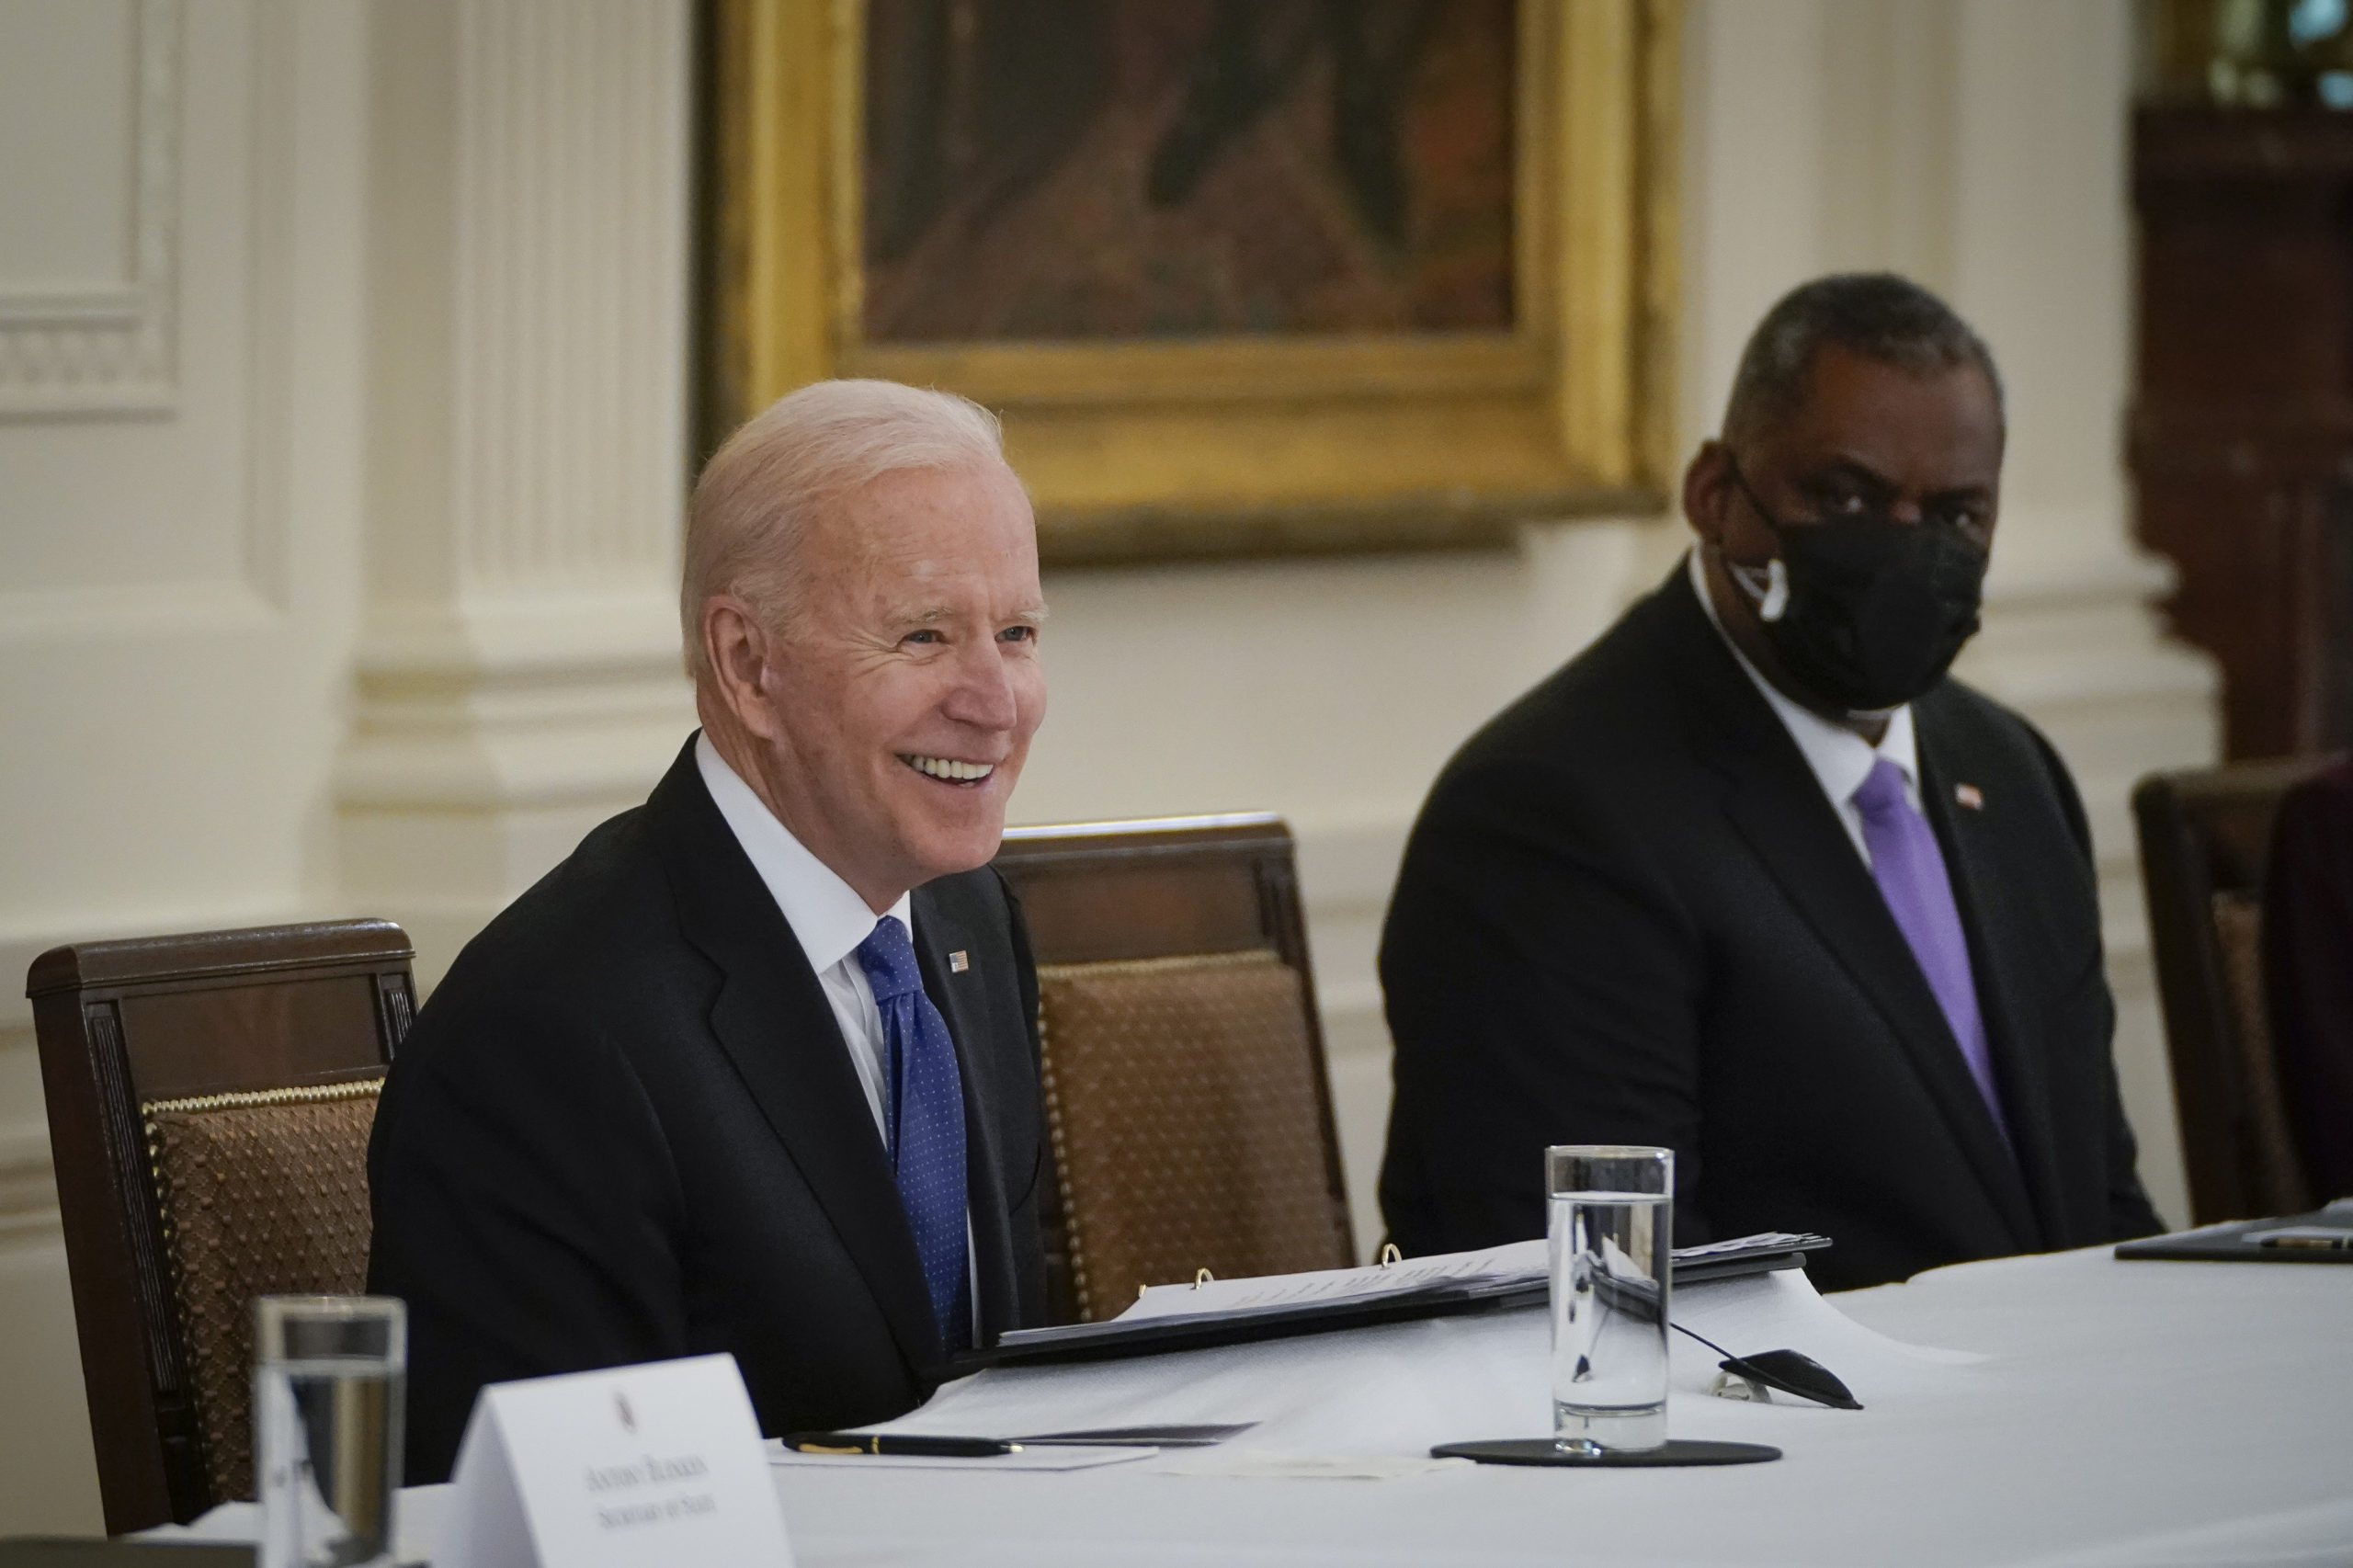 President Joe Biden speaks to reporters at the start of a cabinet meeting on April 1. (Drew Angerer/Getty Images)